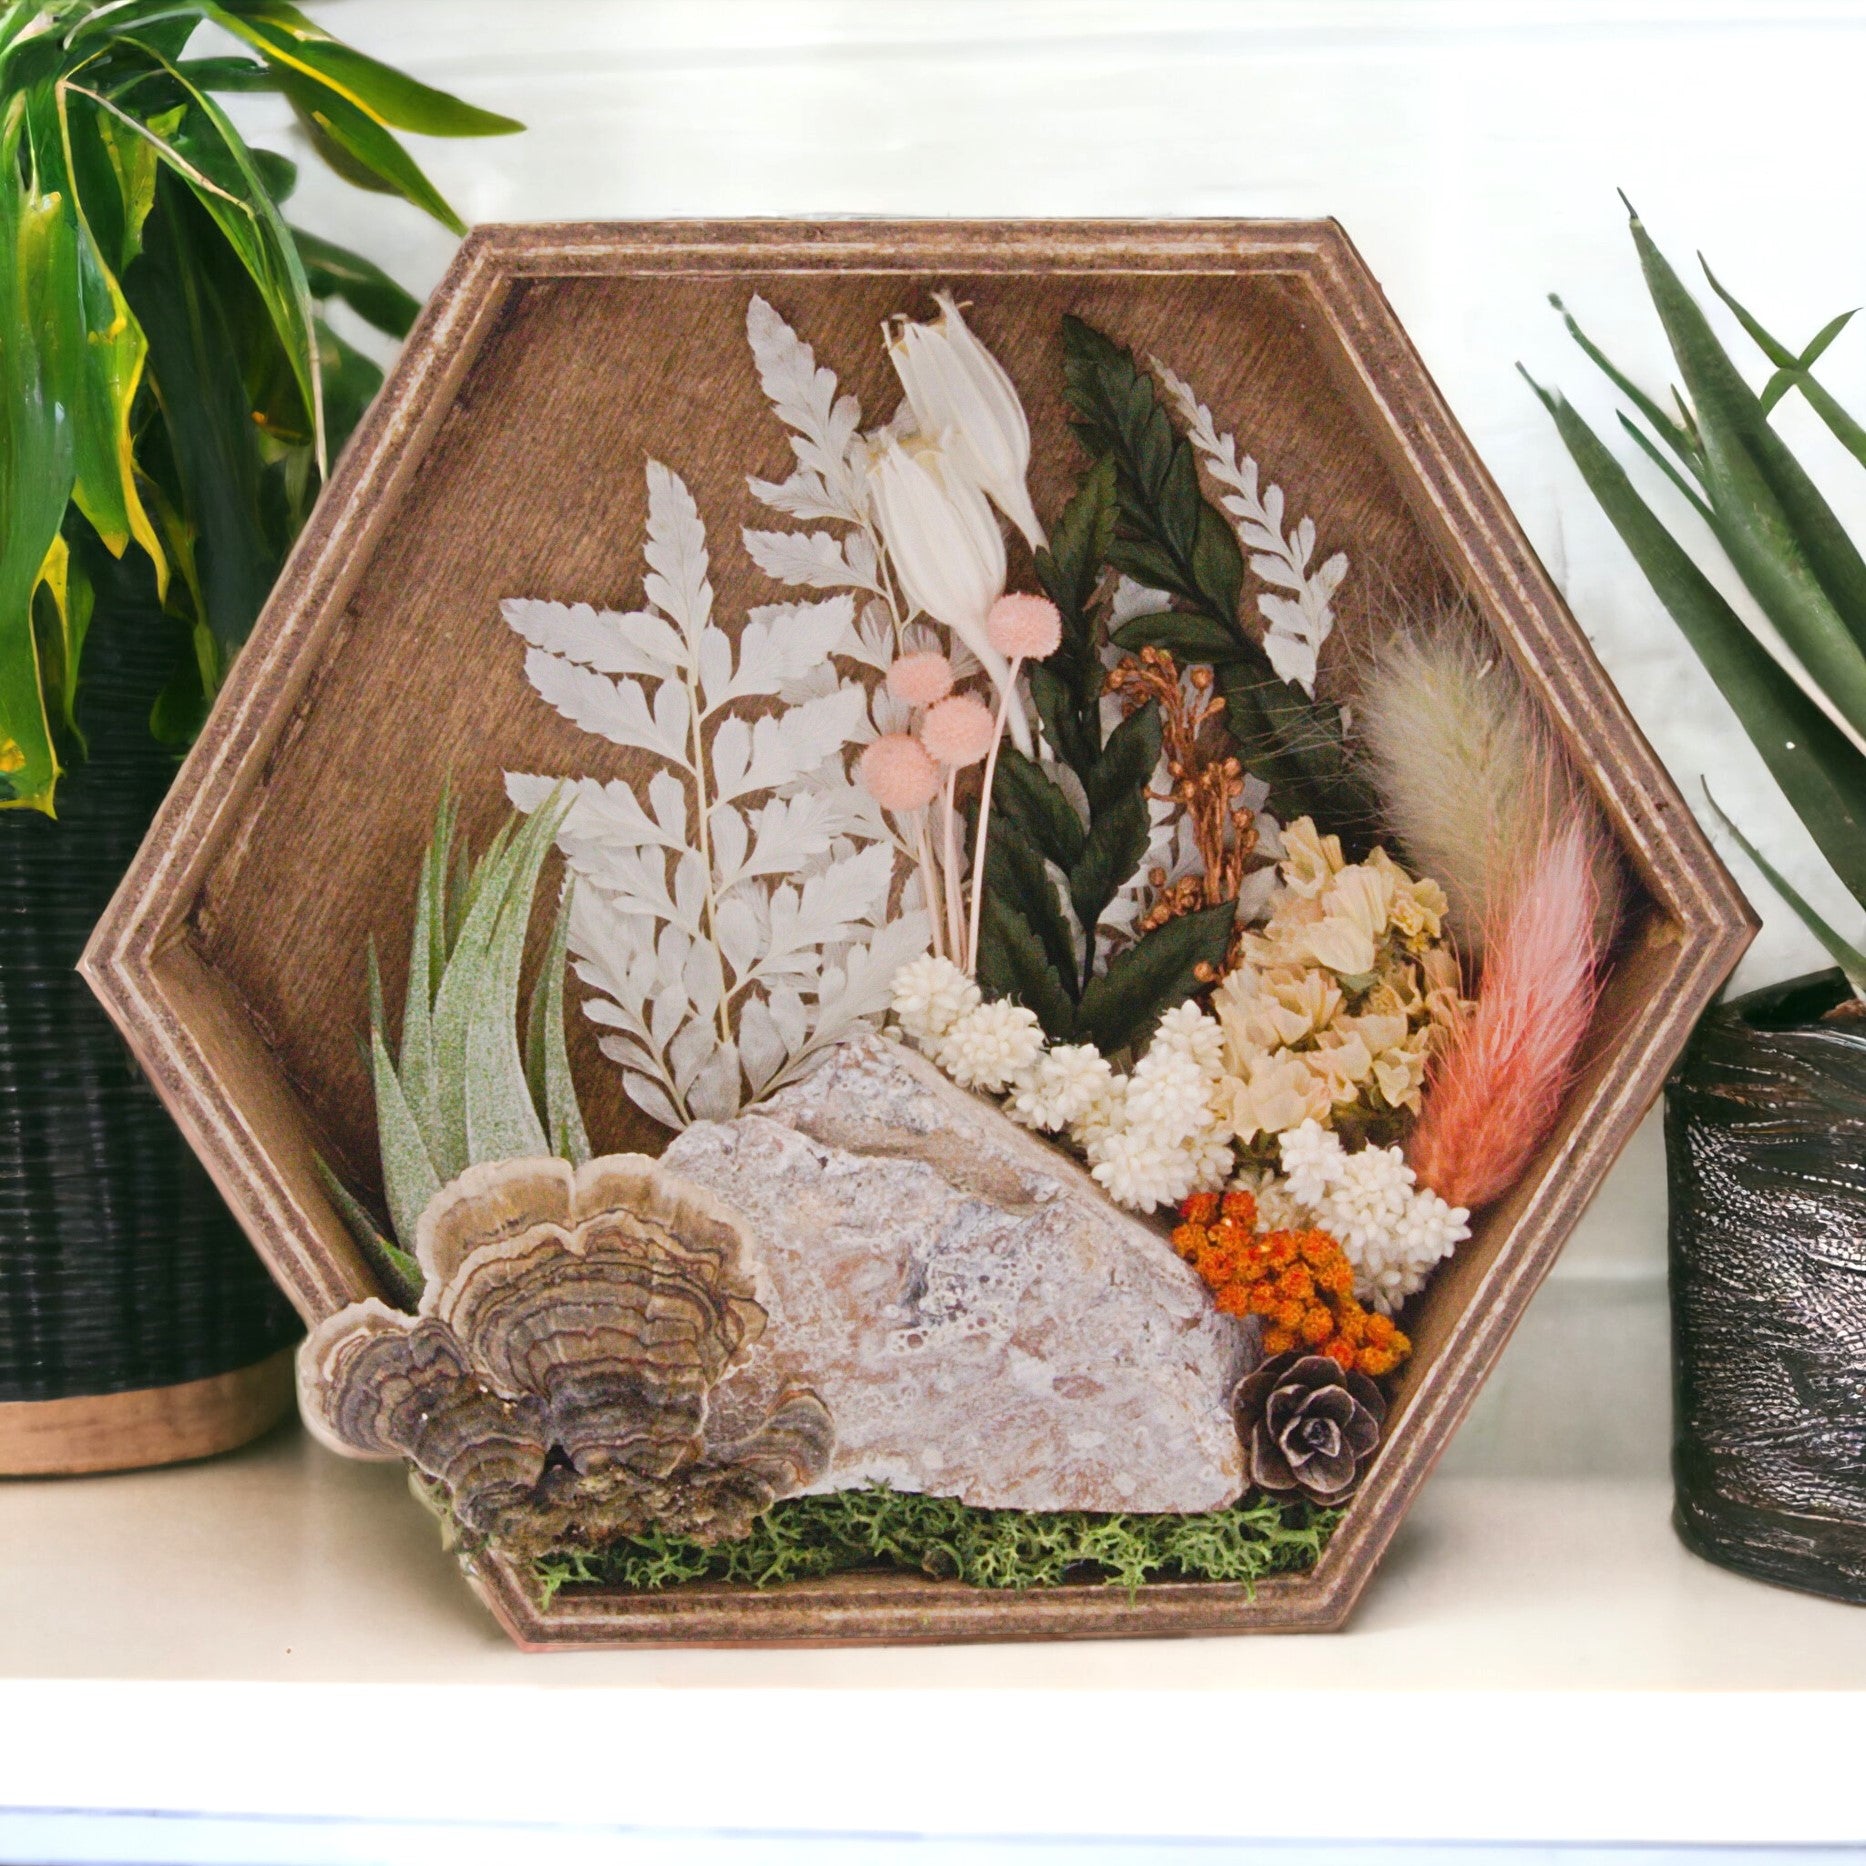 Hexagon wood box frame antique stain filled with dried flowers, moss, wood, dried mushrooms and an airplant